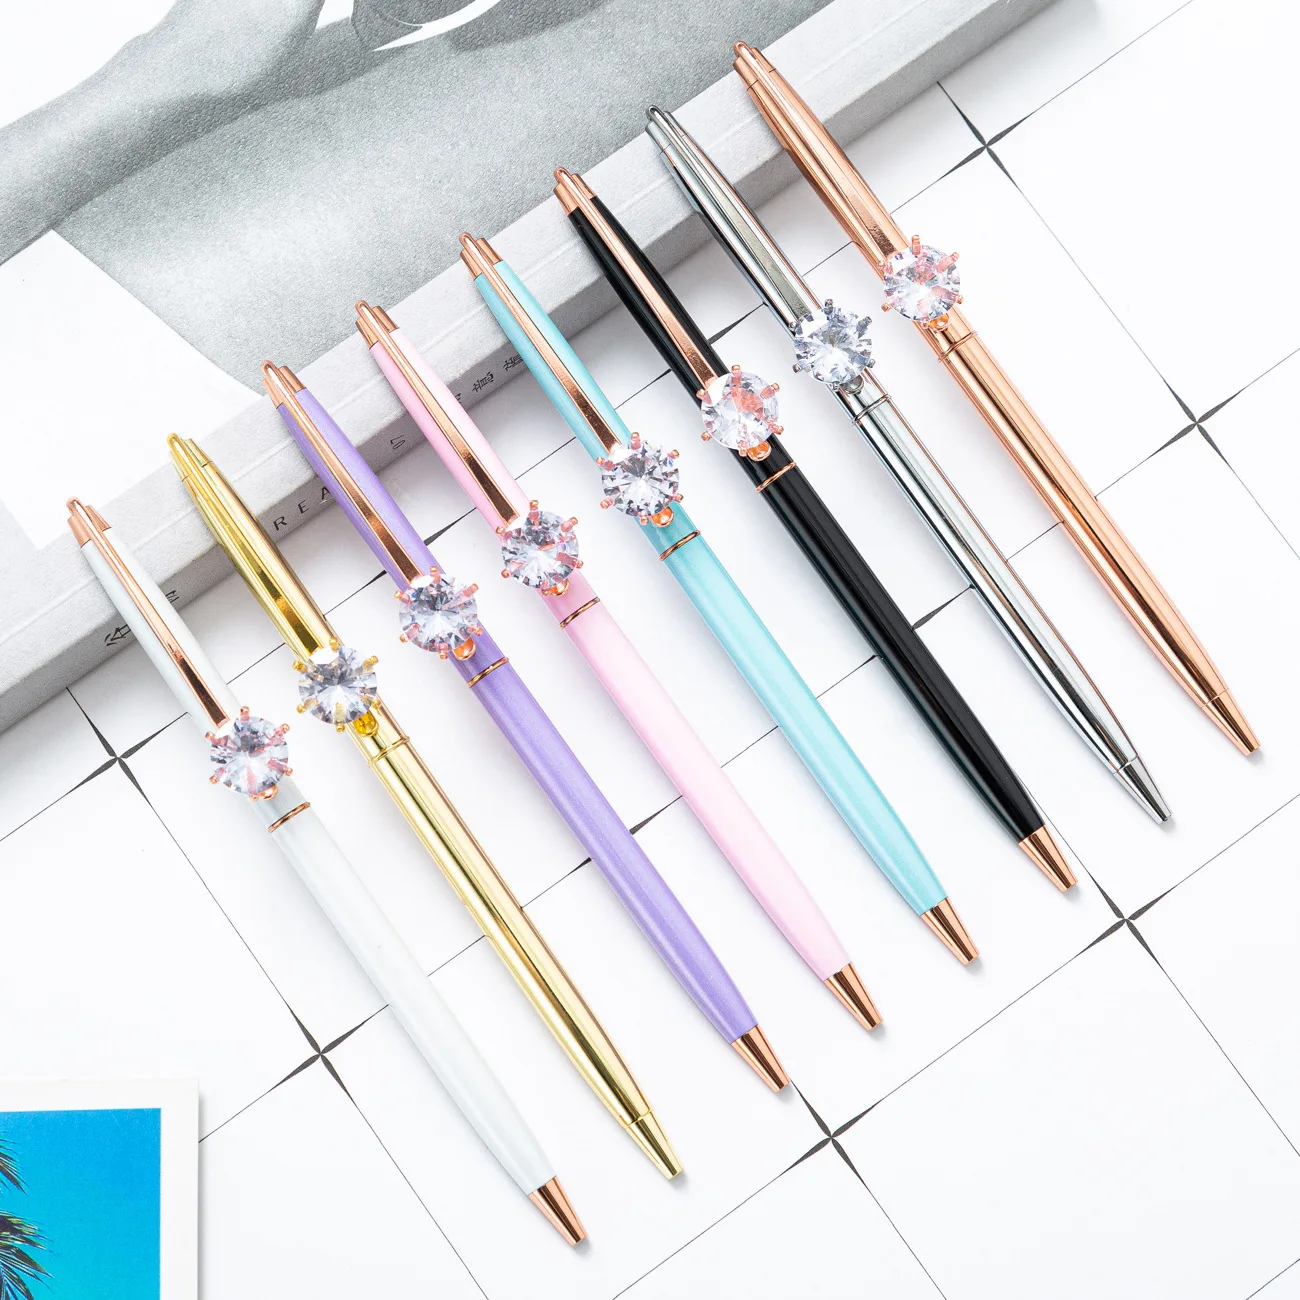 50Pcs High Quality Cute Crystal Diamond Business Office School Stationery Beautiful Gift Ballpoint Pen Can Free Engraving Logo